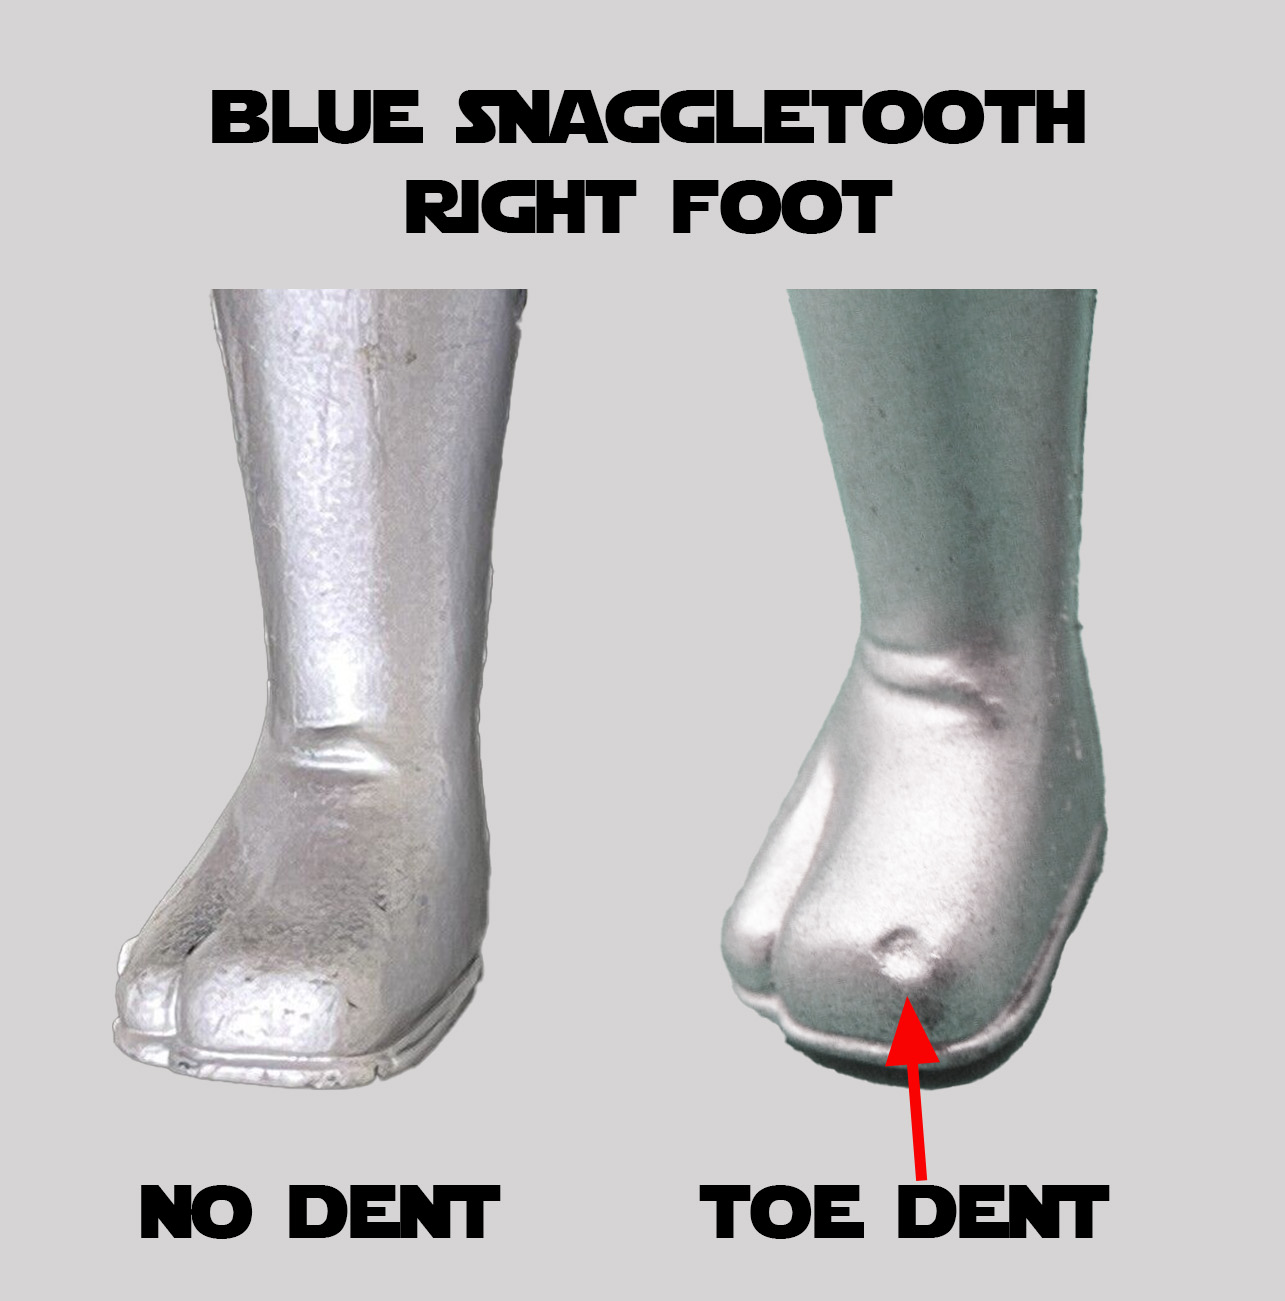 What's the difference between Toe Dent Blue Snaggletooth and regular? The Toe Dent version looks like he stubbed his toe and is missing a chip.